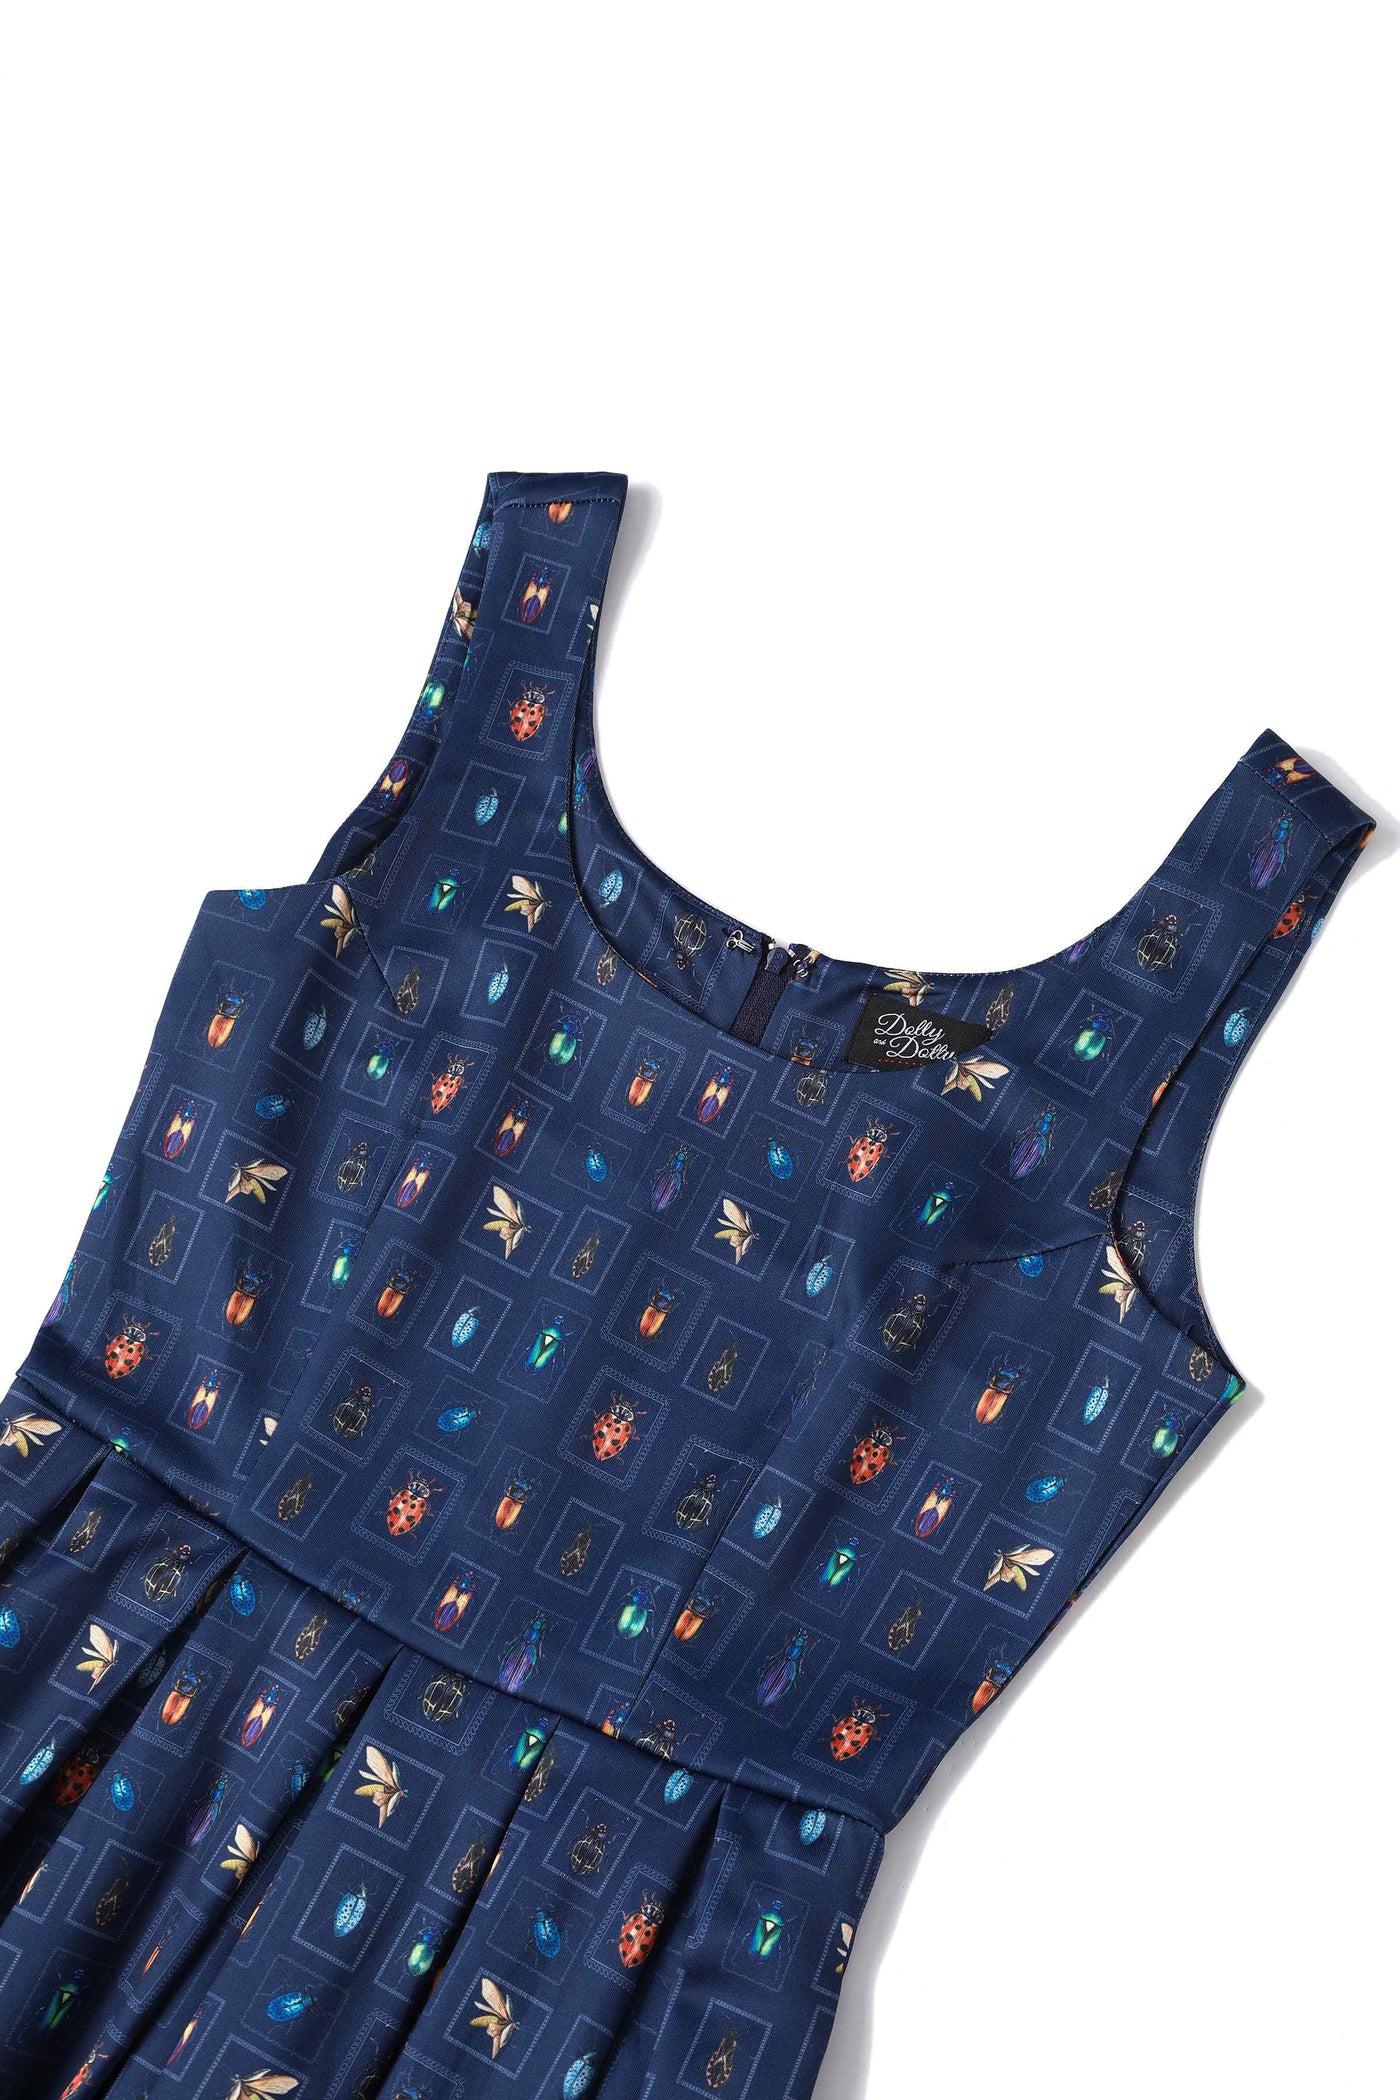 Bug collection print dress in navy blue